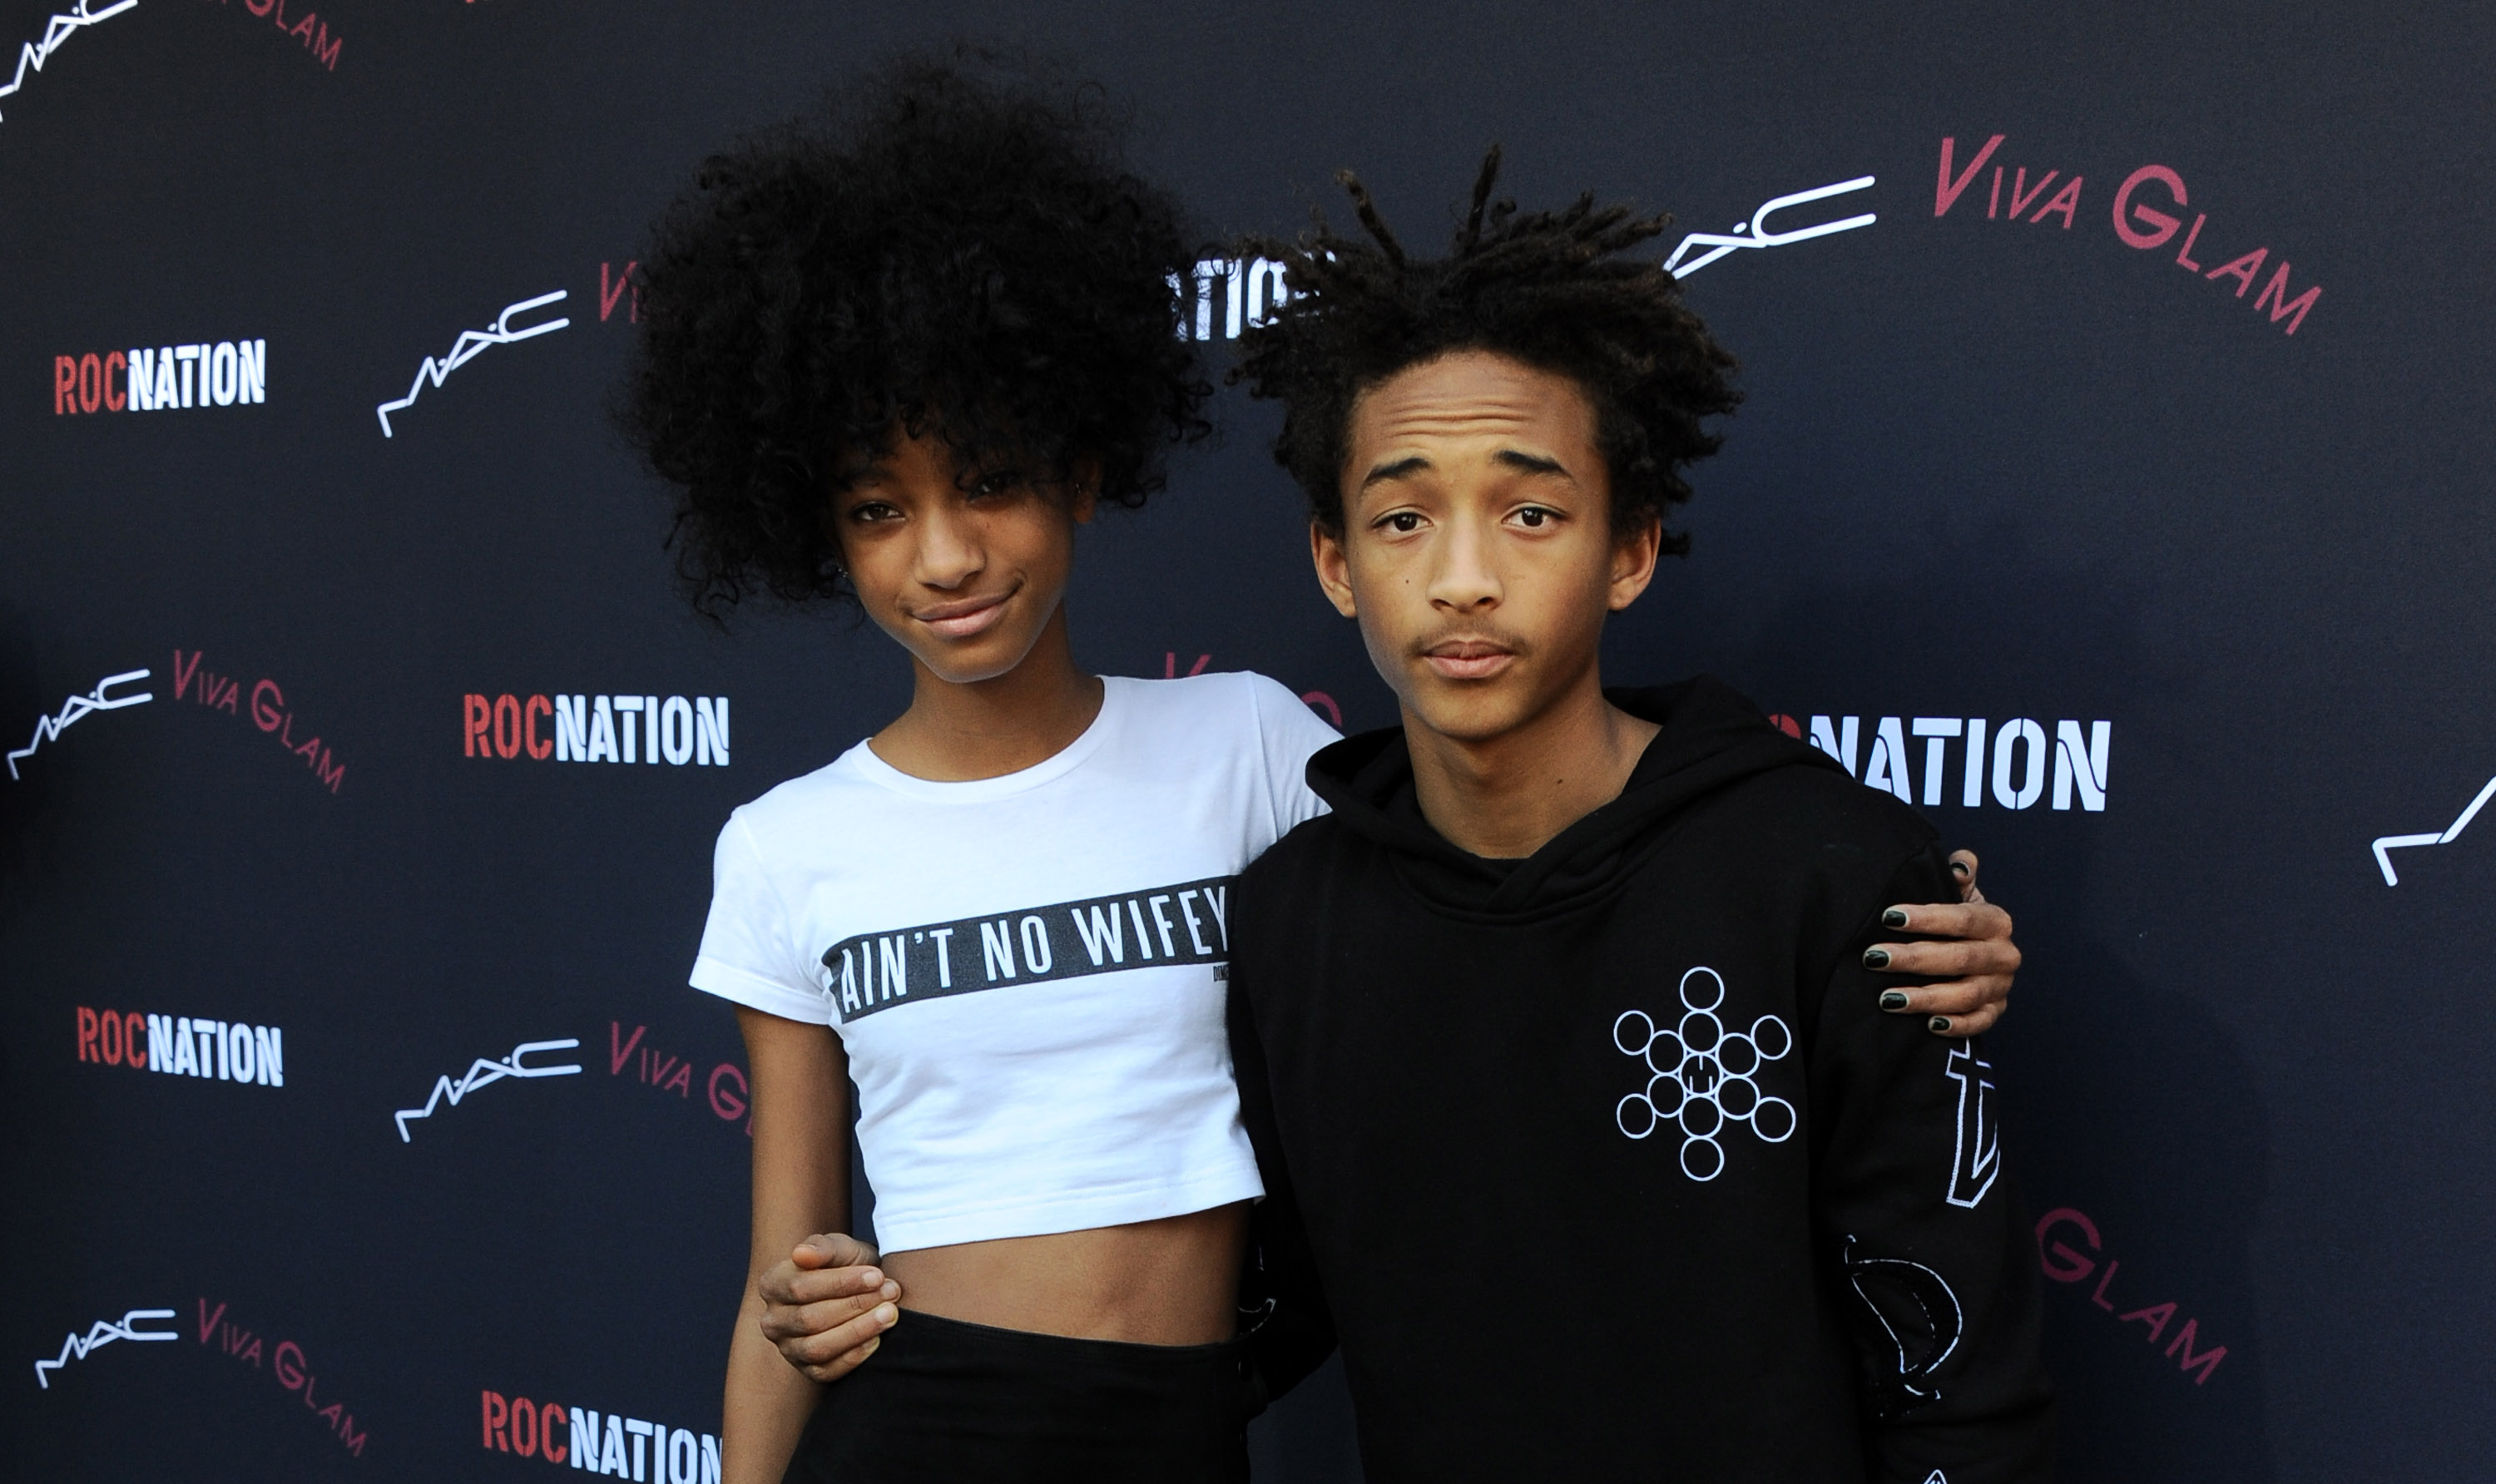 From Left: Willow Smith and her brother Jaden Smith arrive at the Roc Nation 2014 Pre-Grammy Brunch Celebration on Jan. 25, 2014 in Los Angeles. (Jordan Strauss—Invision/AP)